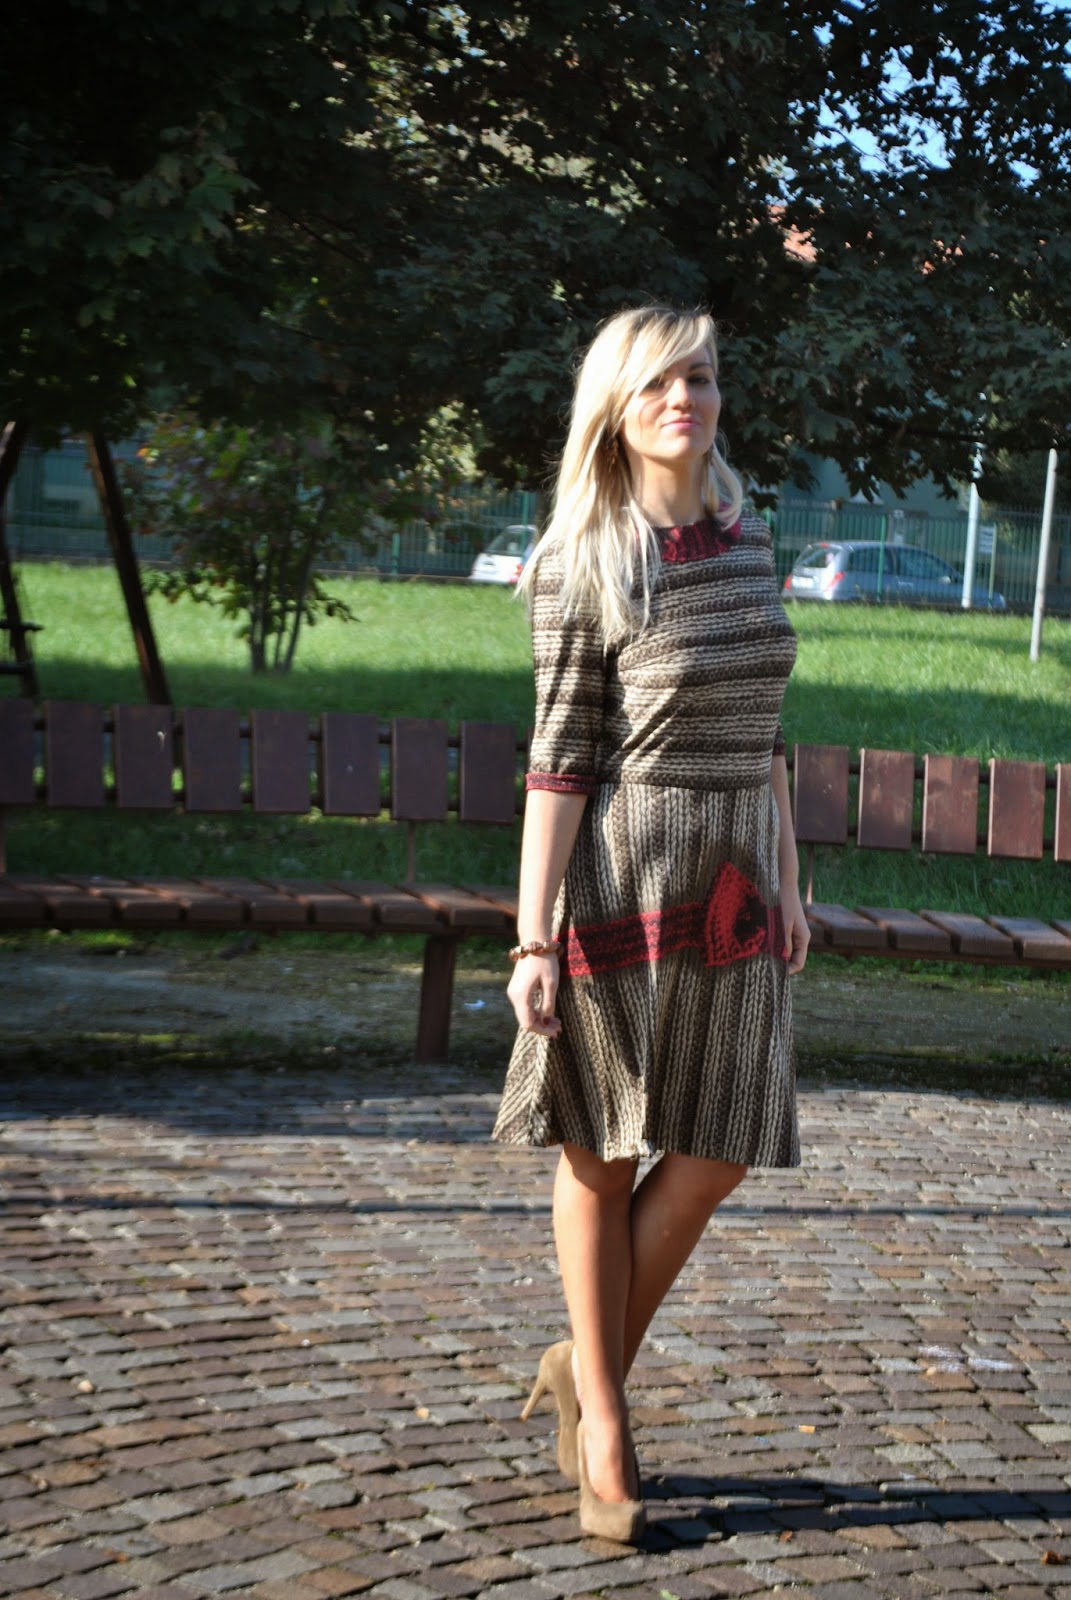 autumnal outfit printed dress red coat how to wear red coat how to wear printed dress fashion bloggers italy italian girl outfit abito con gonna a ruota con stampa maglione di lana stampa lana abito gonna a ruota abiti invernali cappotto rosso outfit cappotto rosso come abbinare il cappotto rosso midi skirt how to wear red coat how to wear midi skirt winter dresses orecchini chandelier majique chandelier earrings majique decollete beige cappotto rosso sisley abito stampato fashion blogger italiane fashion blogger milano fashion blogger bionde ragazze bionde smalto color sangria scarpe benetton borsa louis vuitton mariafelicia magno fashion blogger mariafelicia magno colorblock by felym outfit ottobre 2014 outfit autunnali outfit invernali 